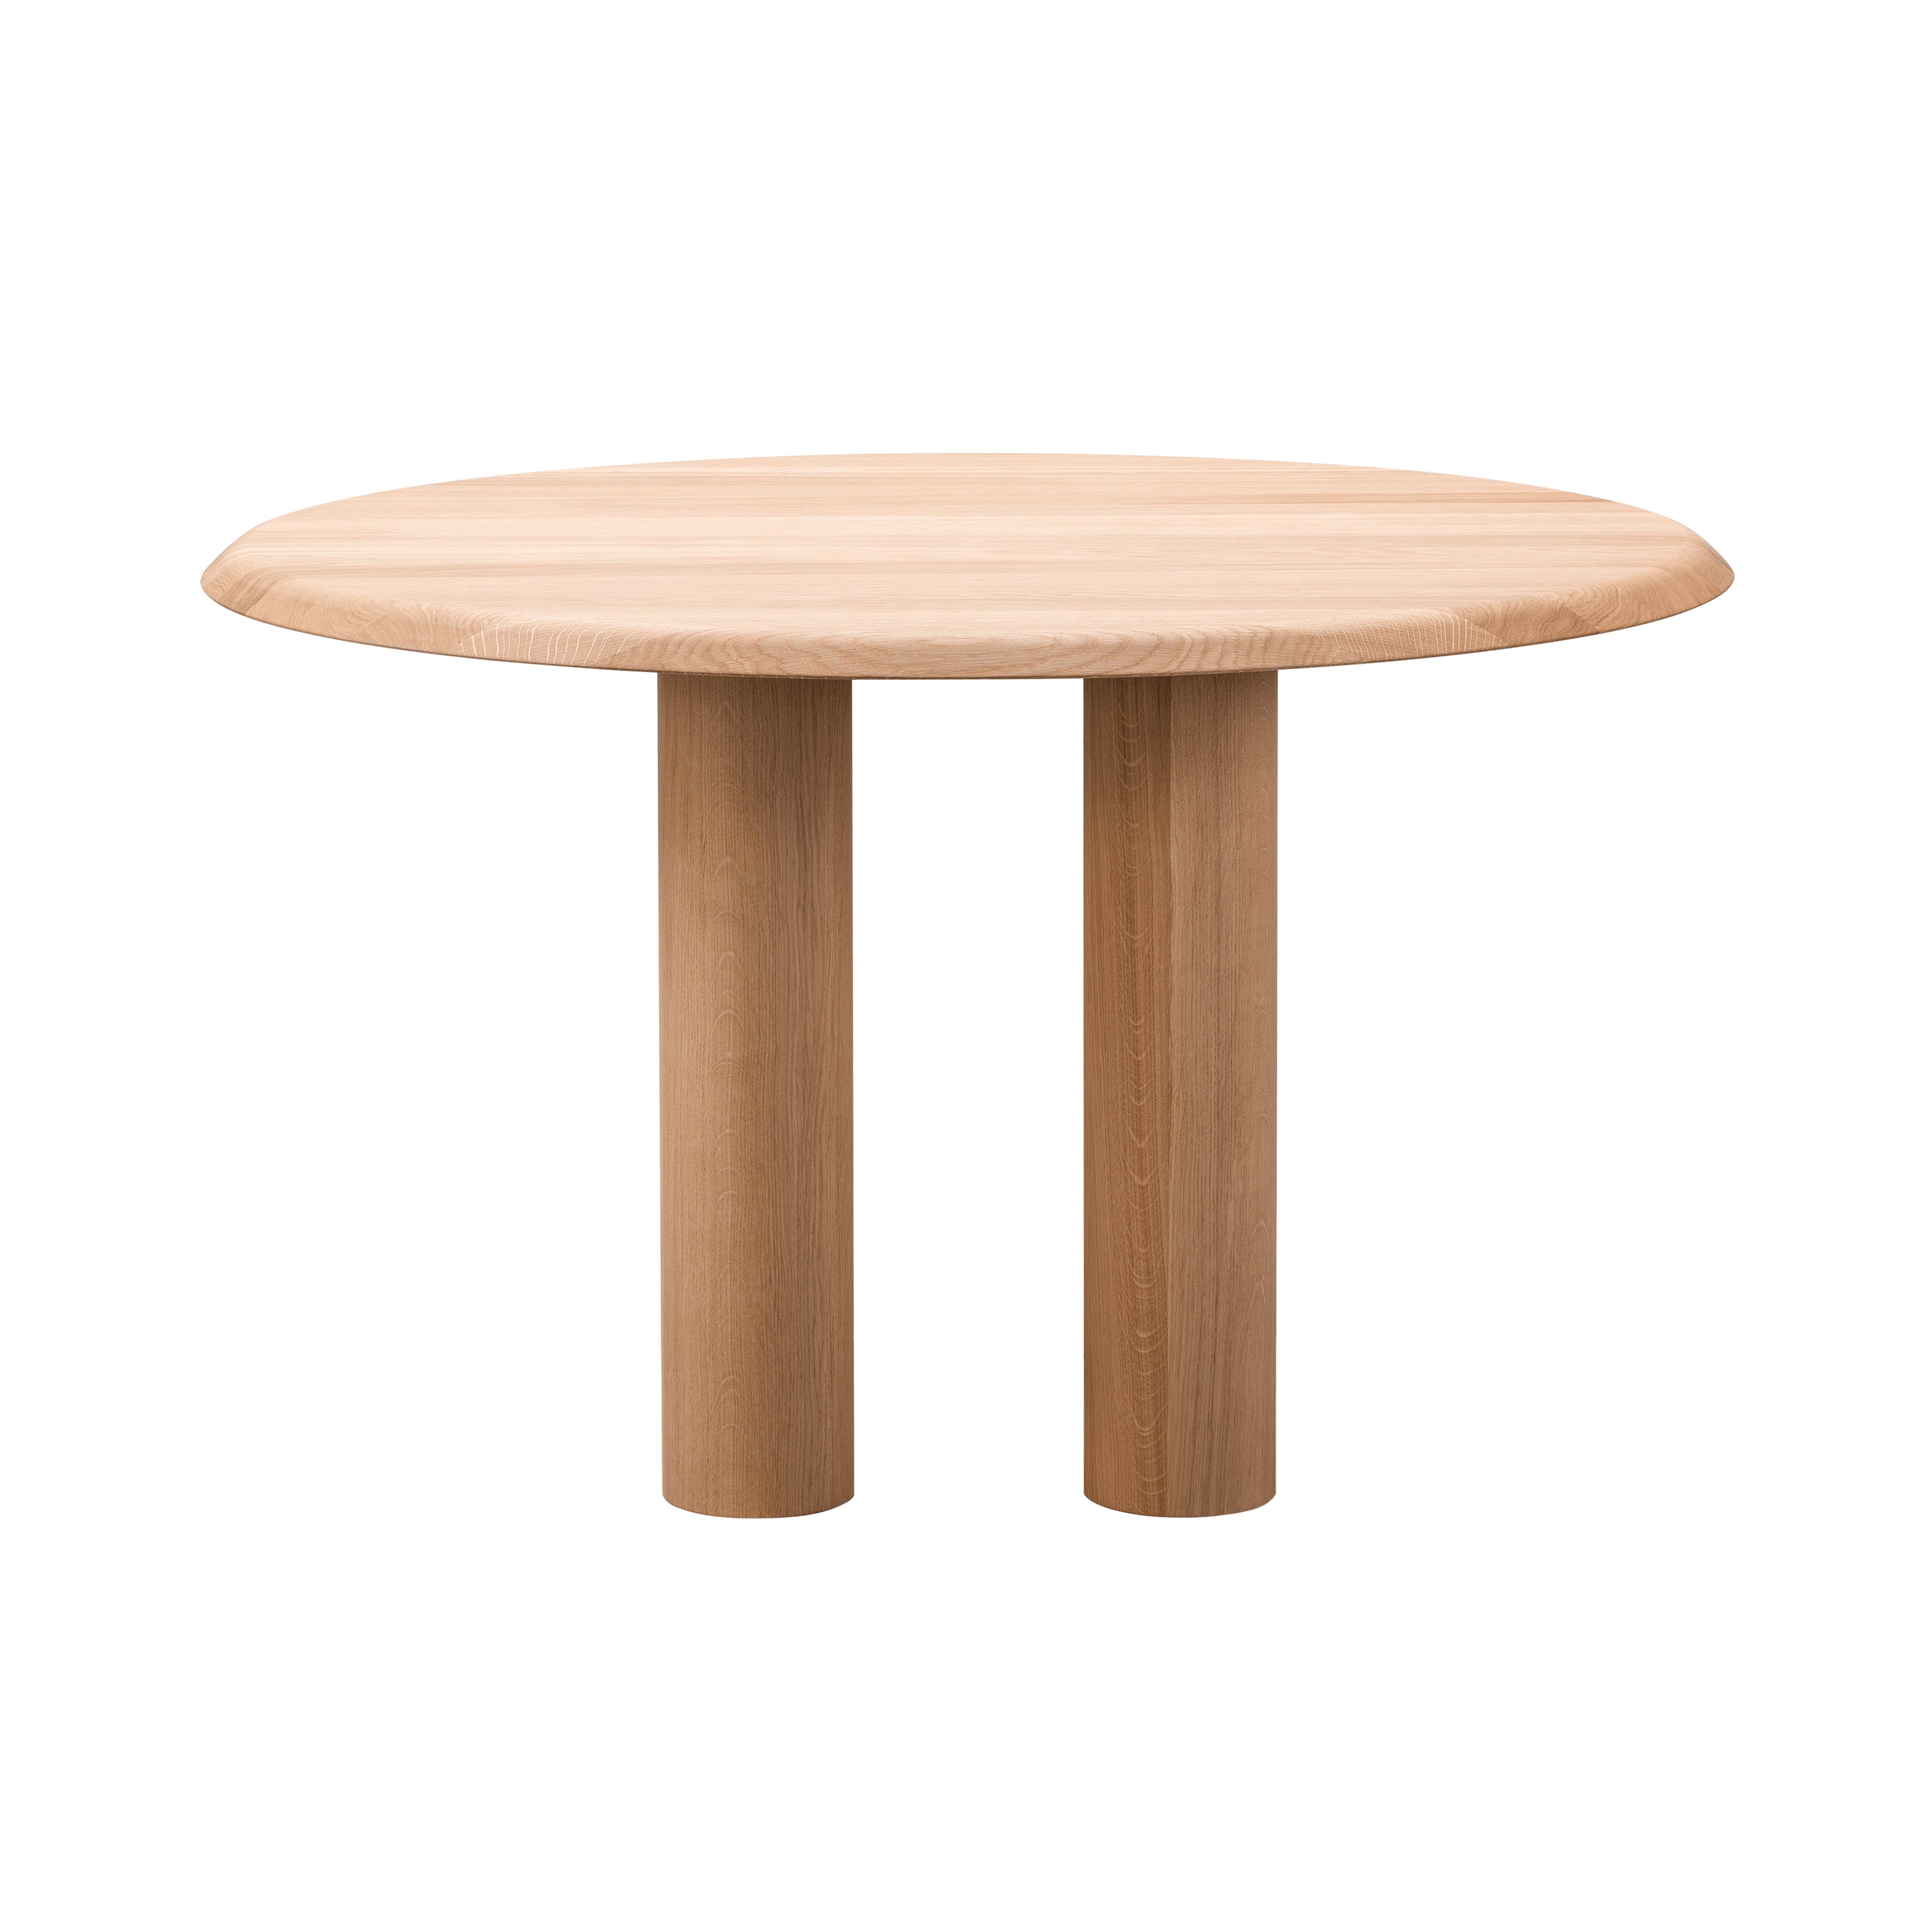 Islets Dining Table: Light Oiled Oak